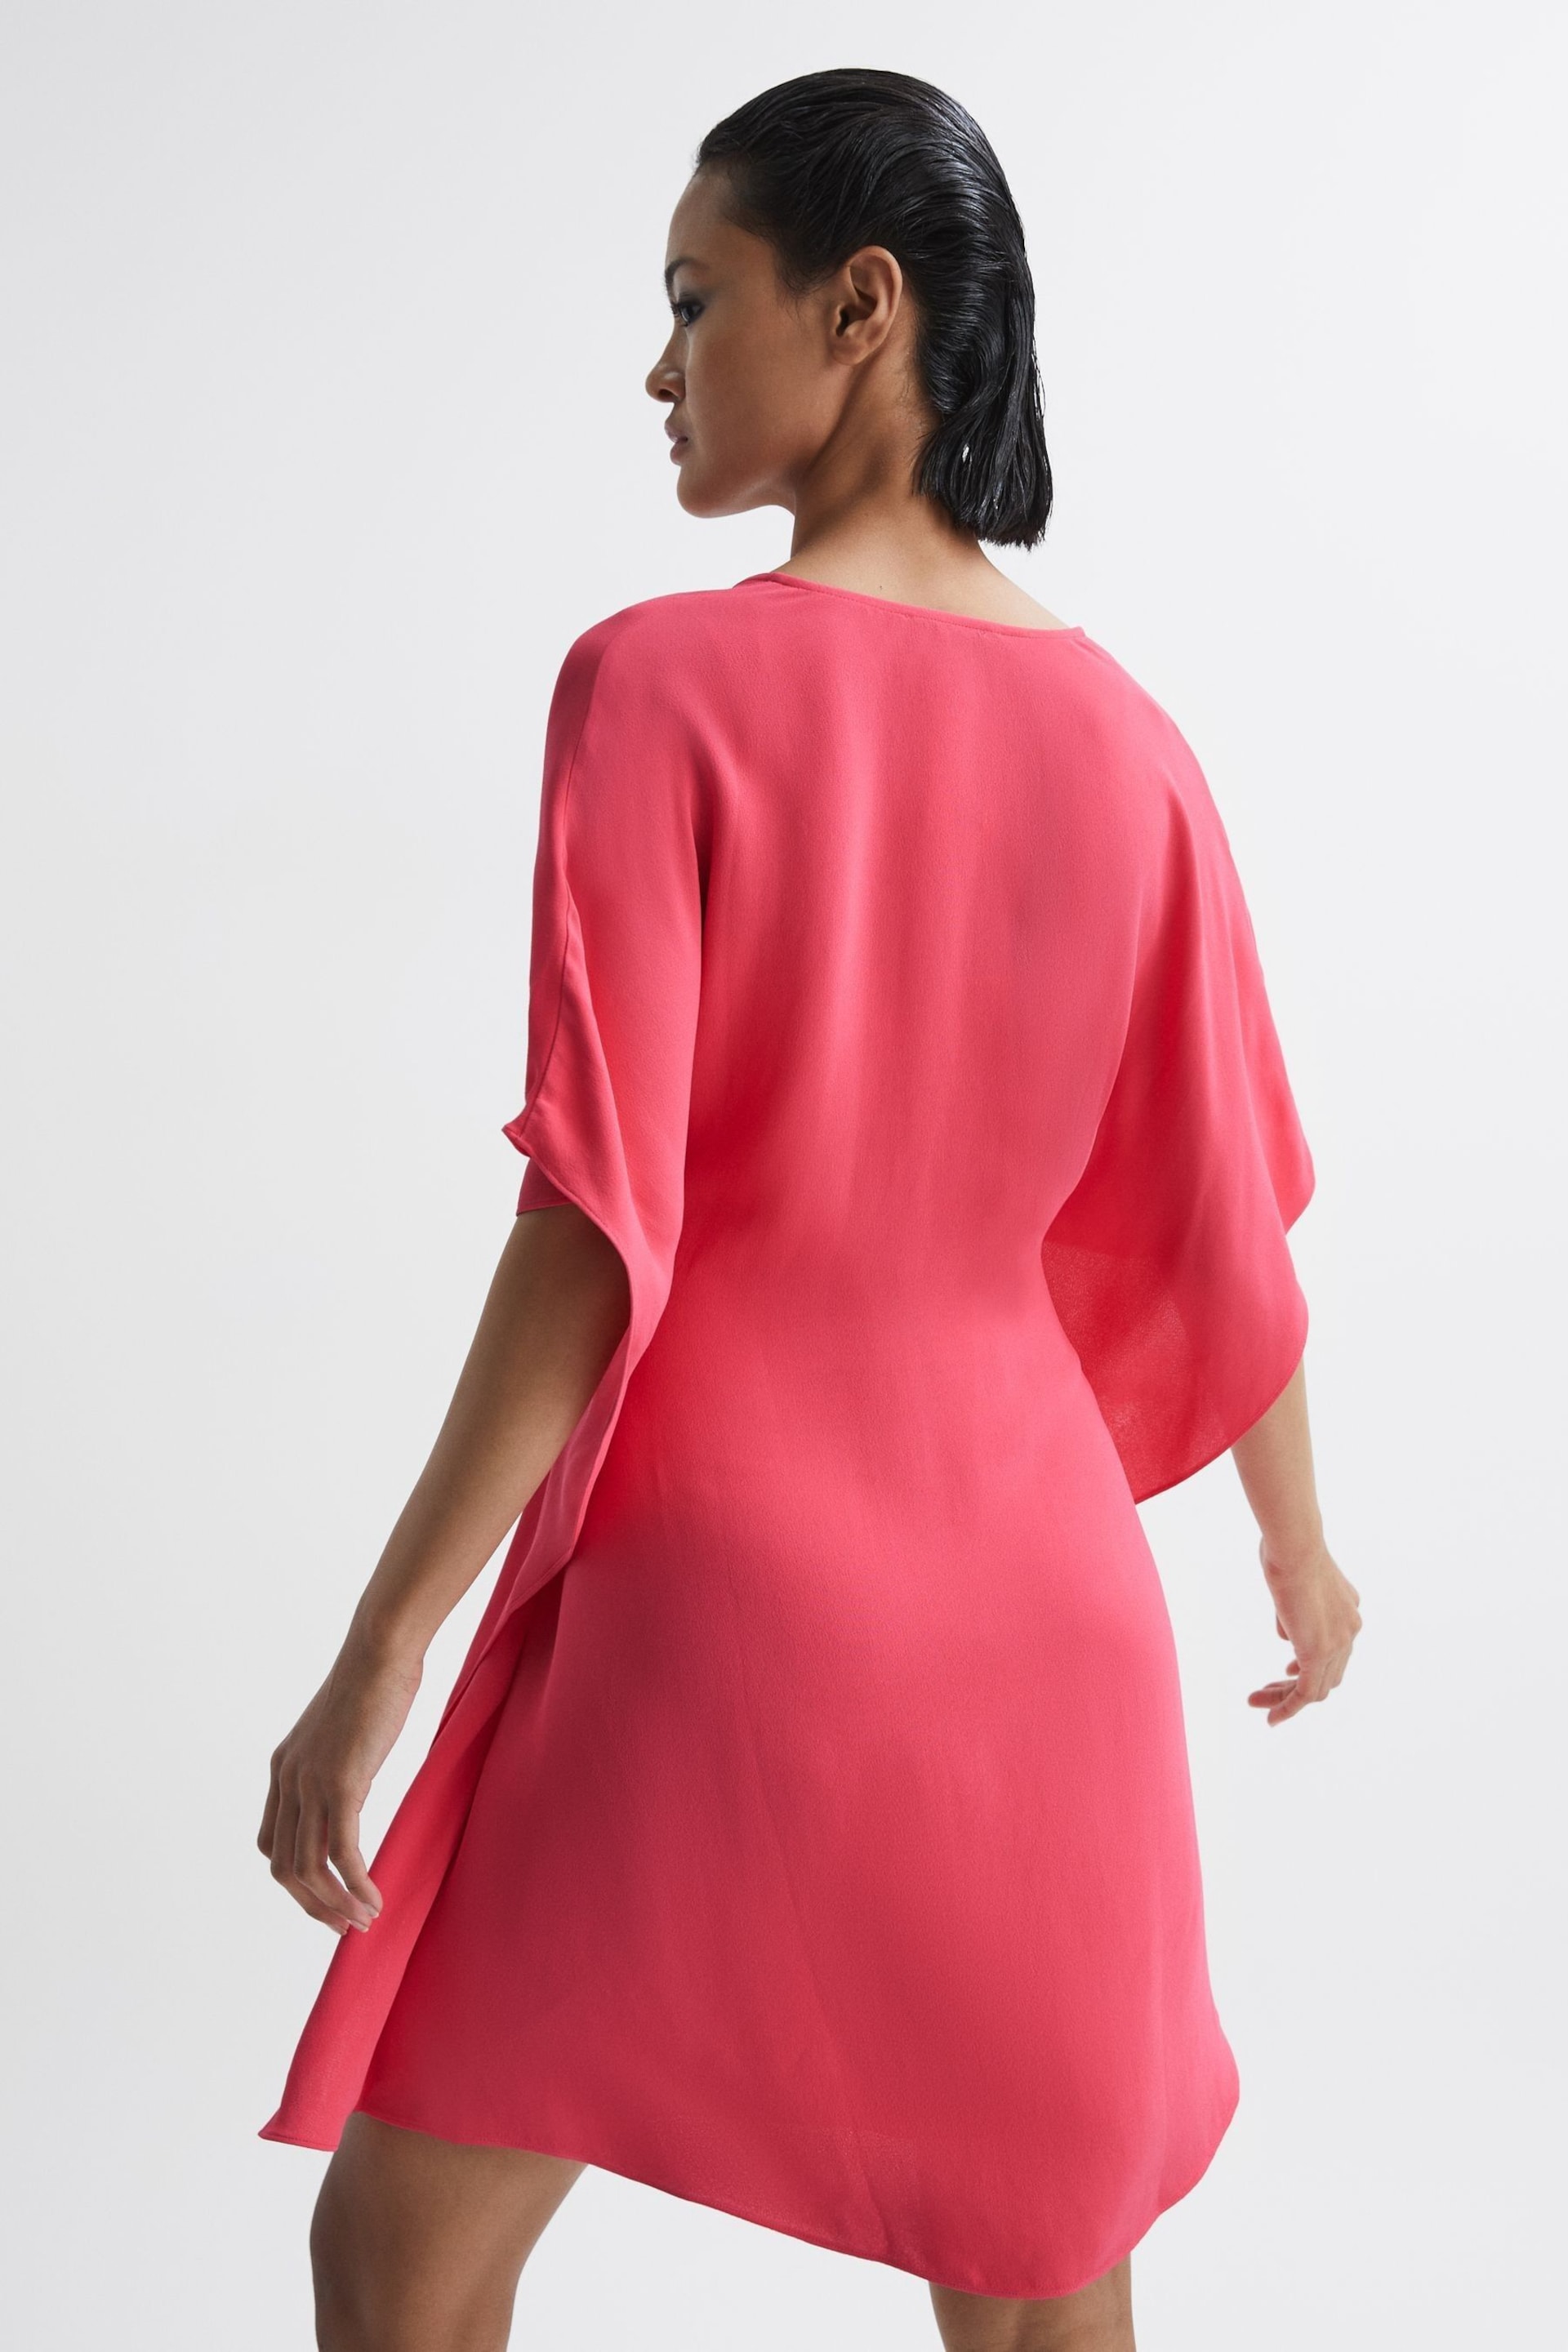 Reiss Pink Peony Relaxed Fit Wrap Mini Dress - Image 5 of 7